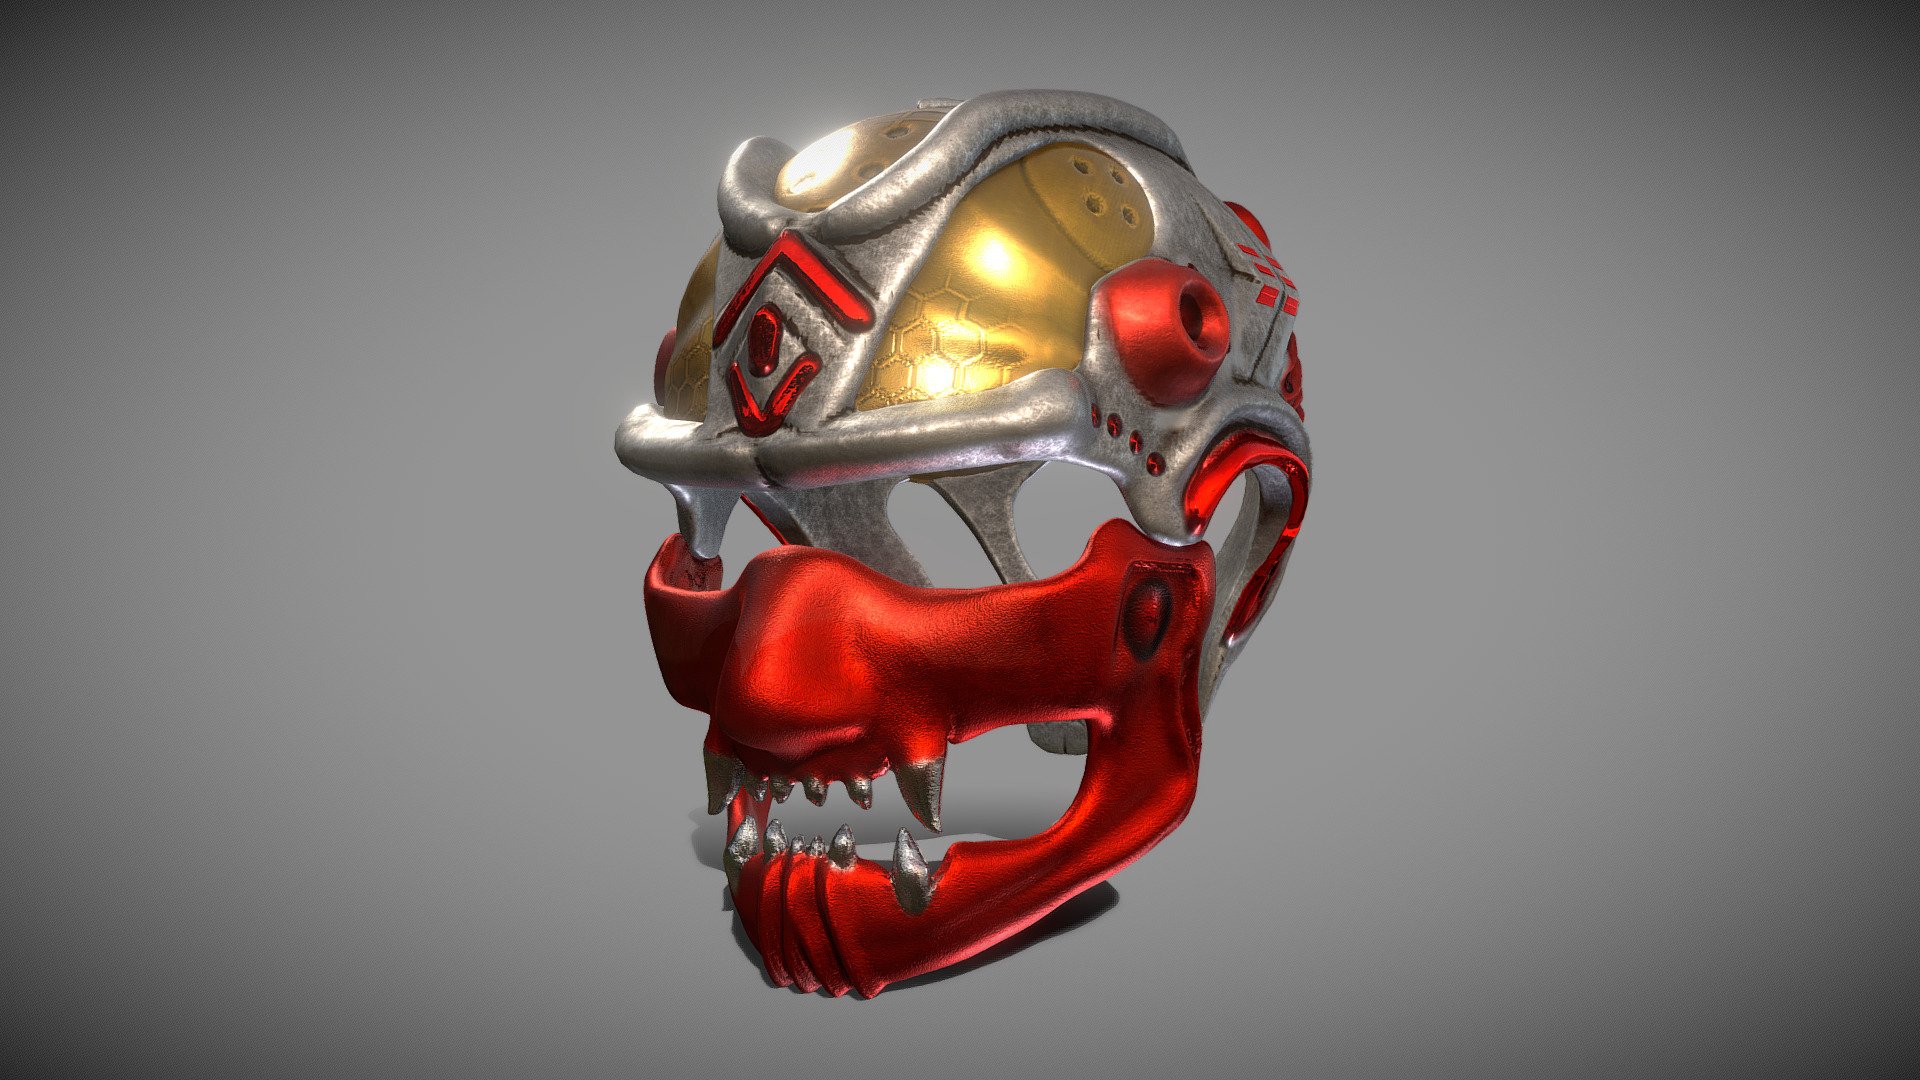 Individual parts ( Face mask, Top and helmet )
Digital painting in 3D Coat
PBR Textures ( 4096 px )
Quad Mesh

by Lucid Dreams visuals

www.luciddreamsvisuals.com.ar - Red Helmet - Japan Style mask - Buy Royalty Free 3D model by Lucid Dreams (@vjluciddreams) 3d model